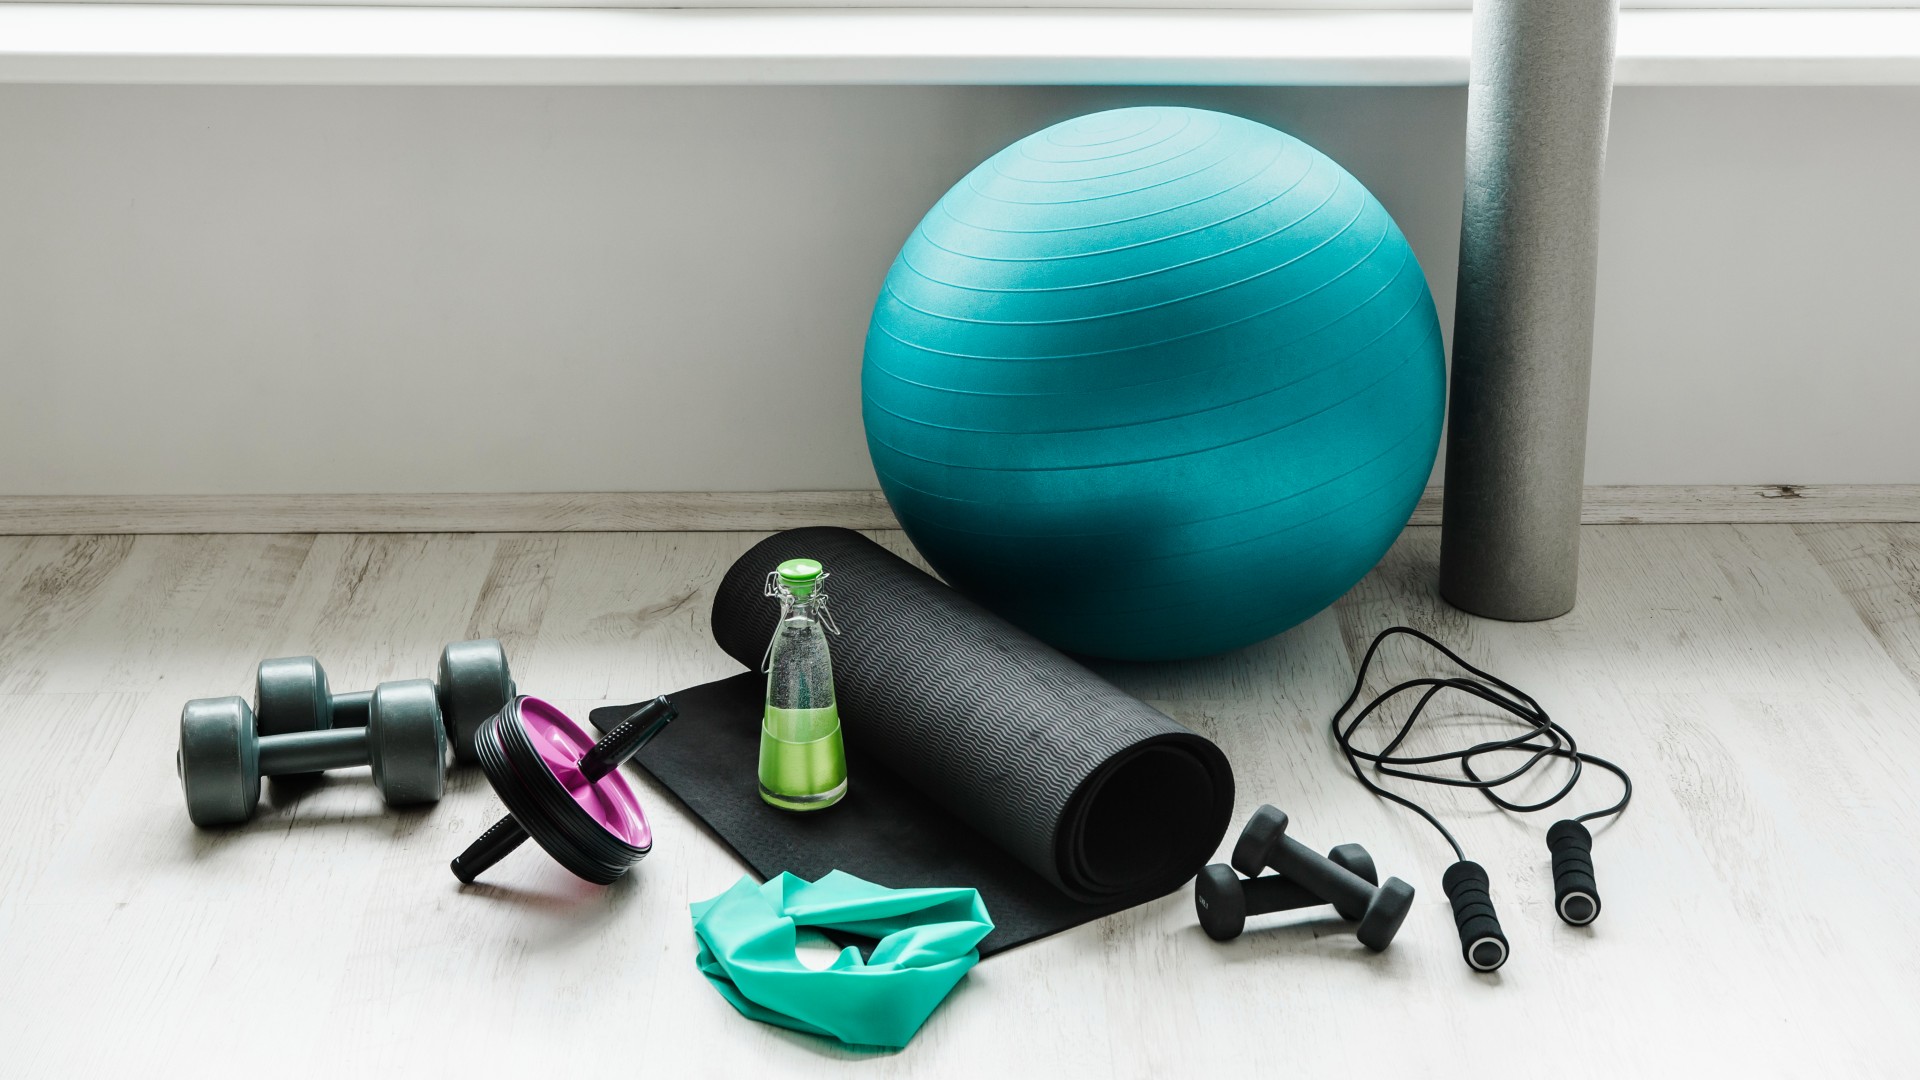 INSPIRATION oversized & instructional mat is great for working out from  home » Gadget Flow